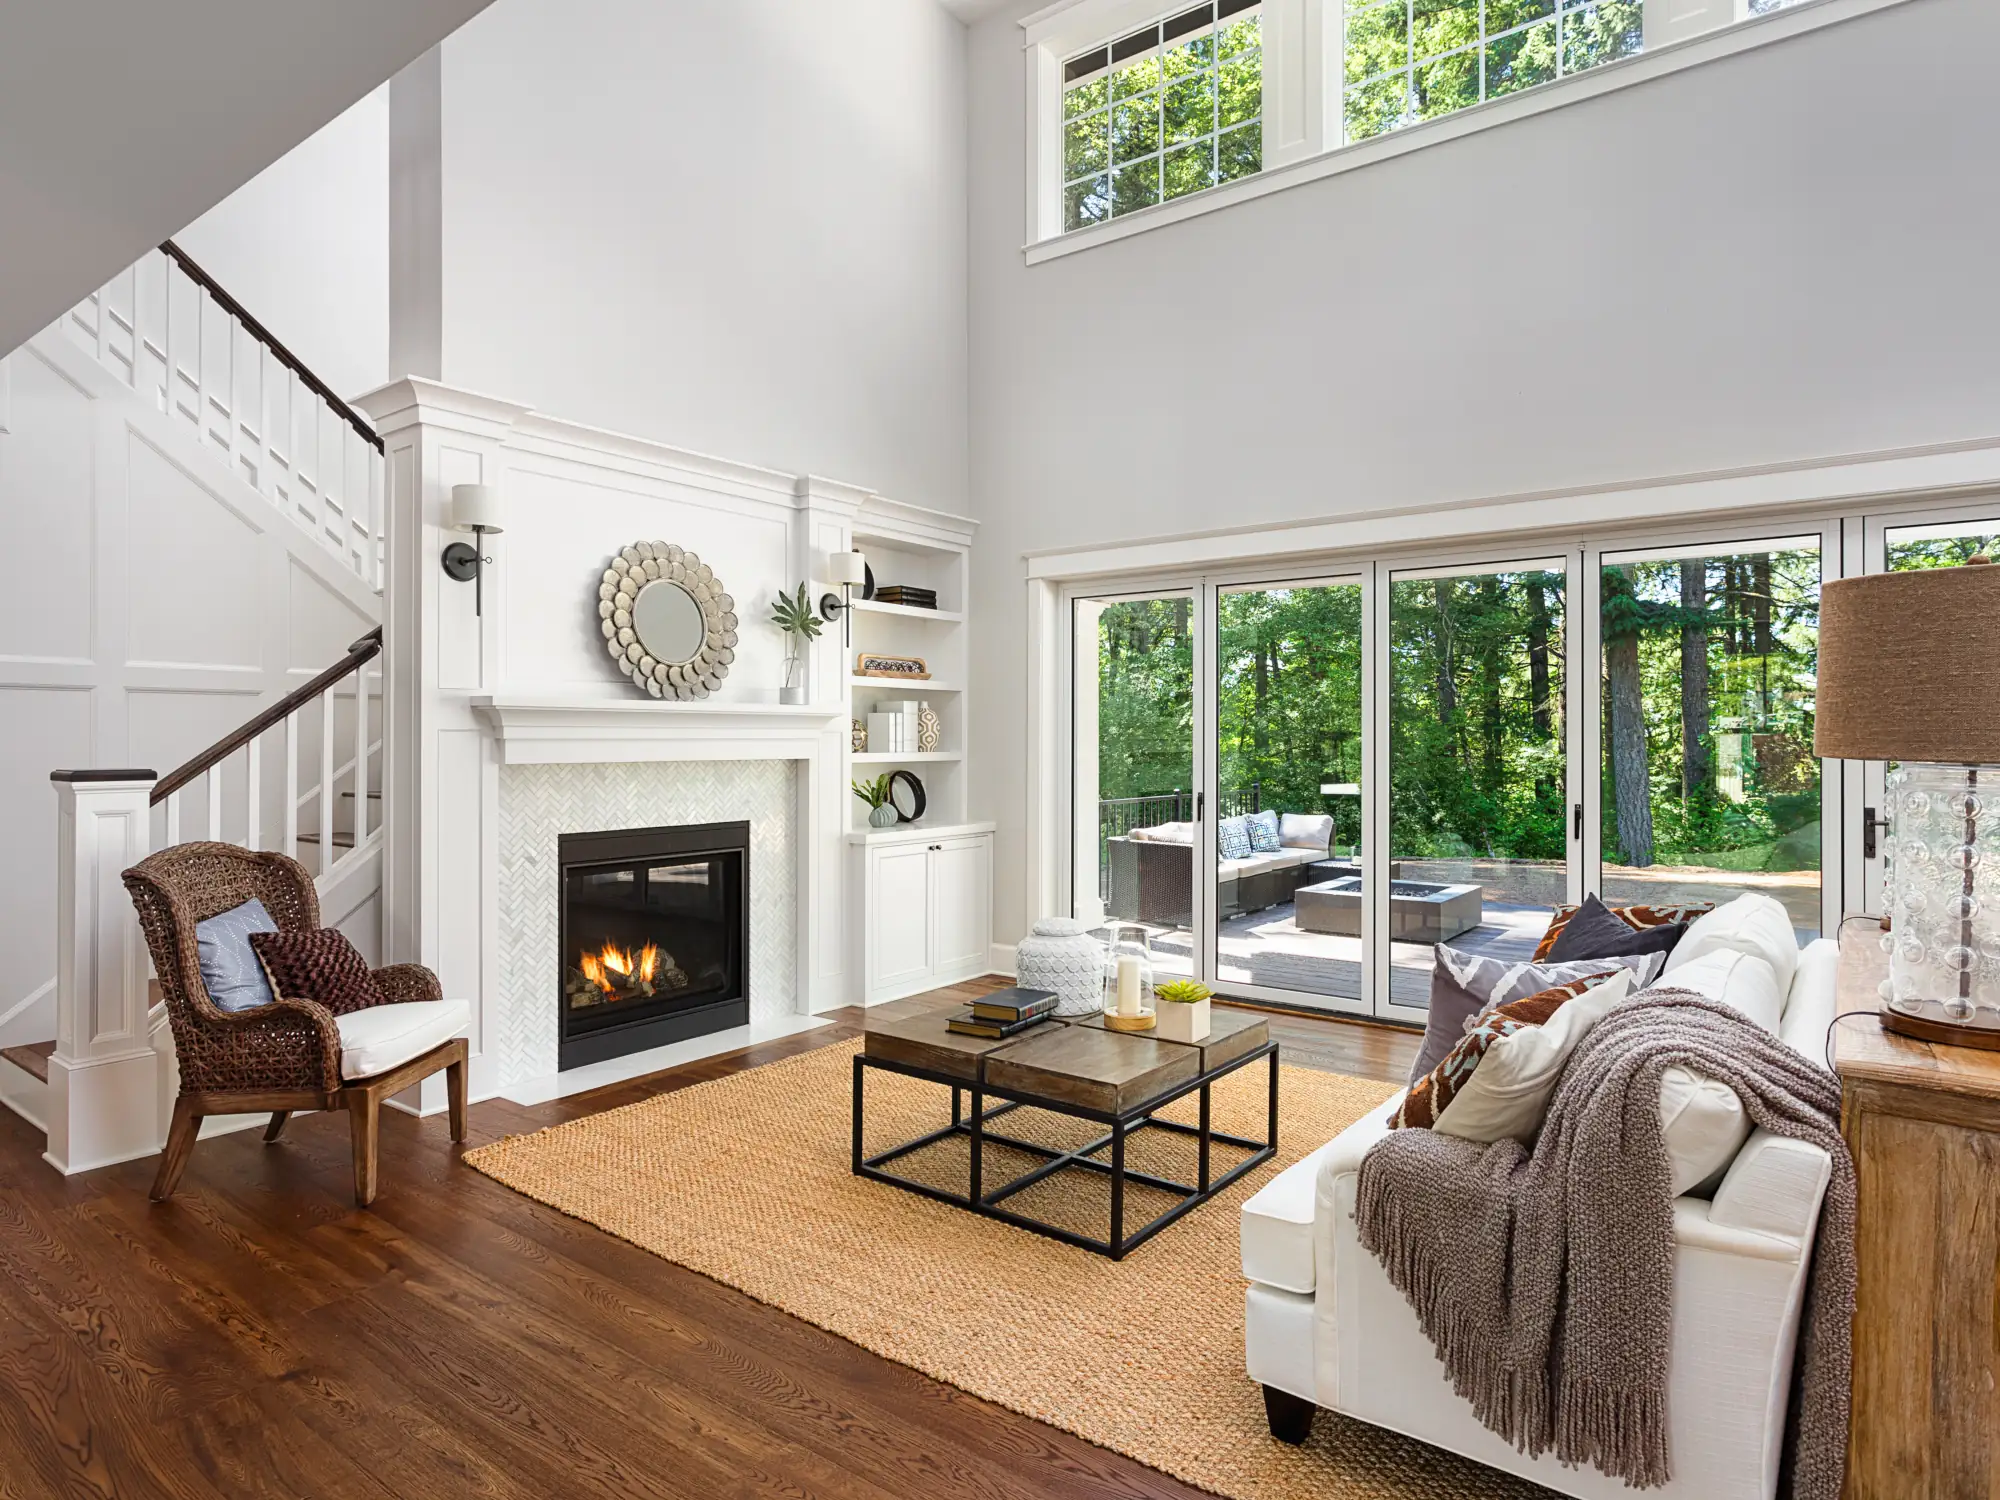 A large, bright Living Room interior with fireplace and lots of glass windows is a custom quality home interior.